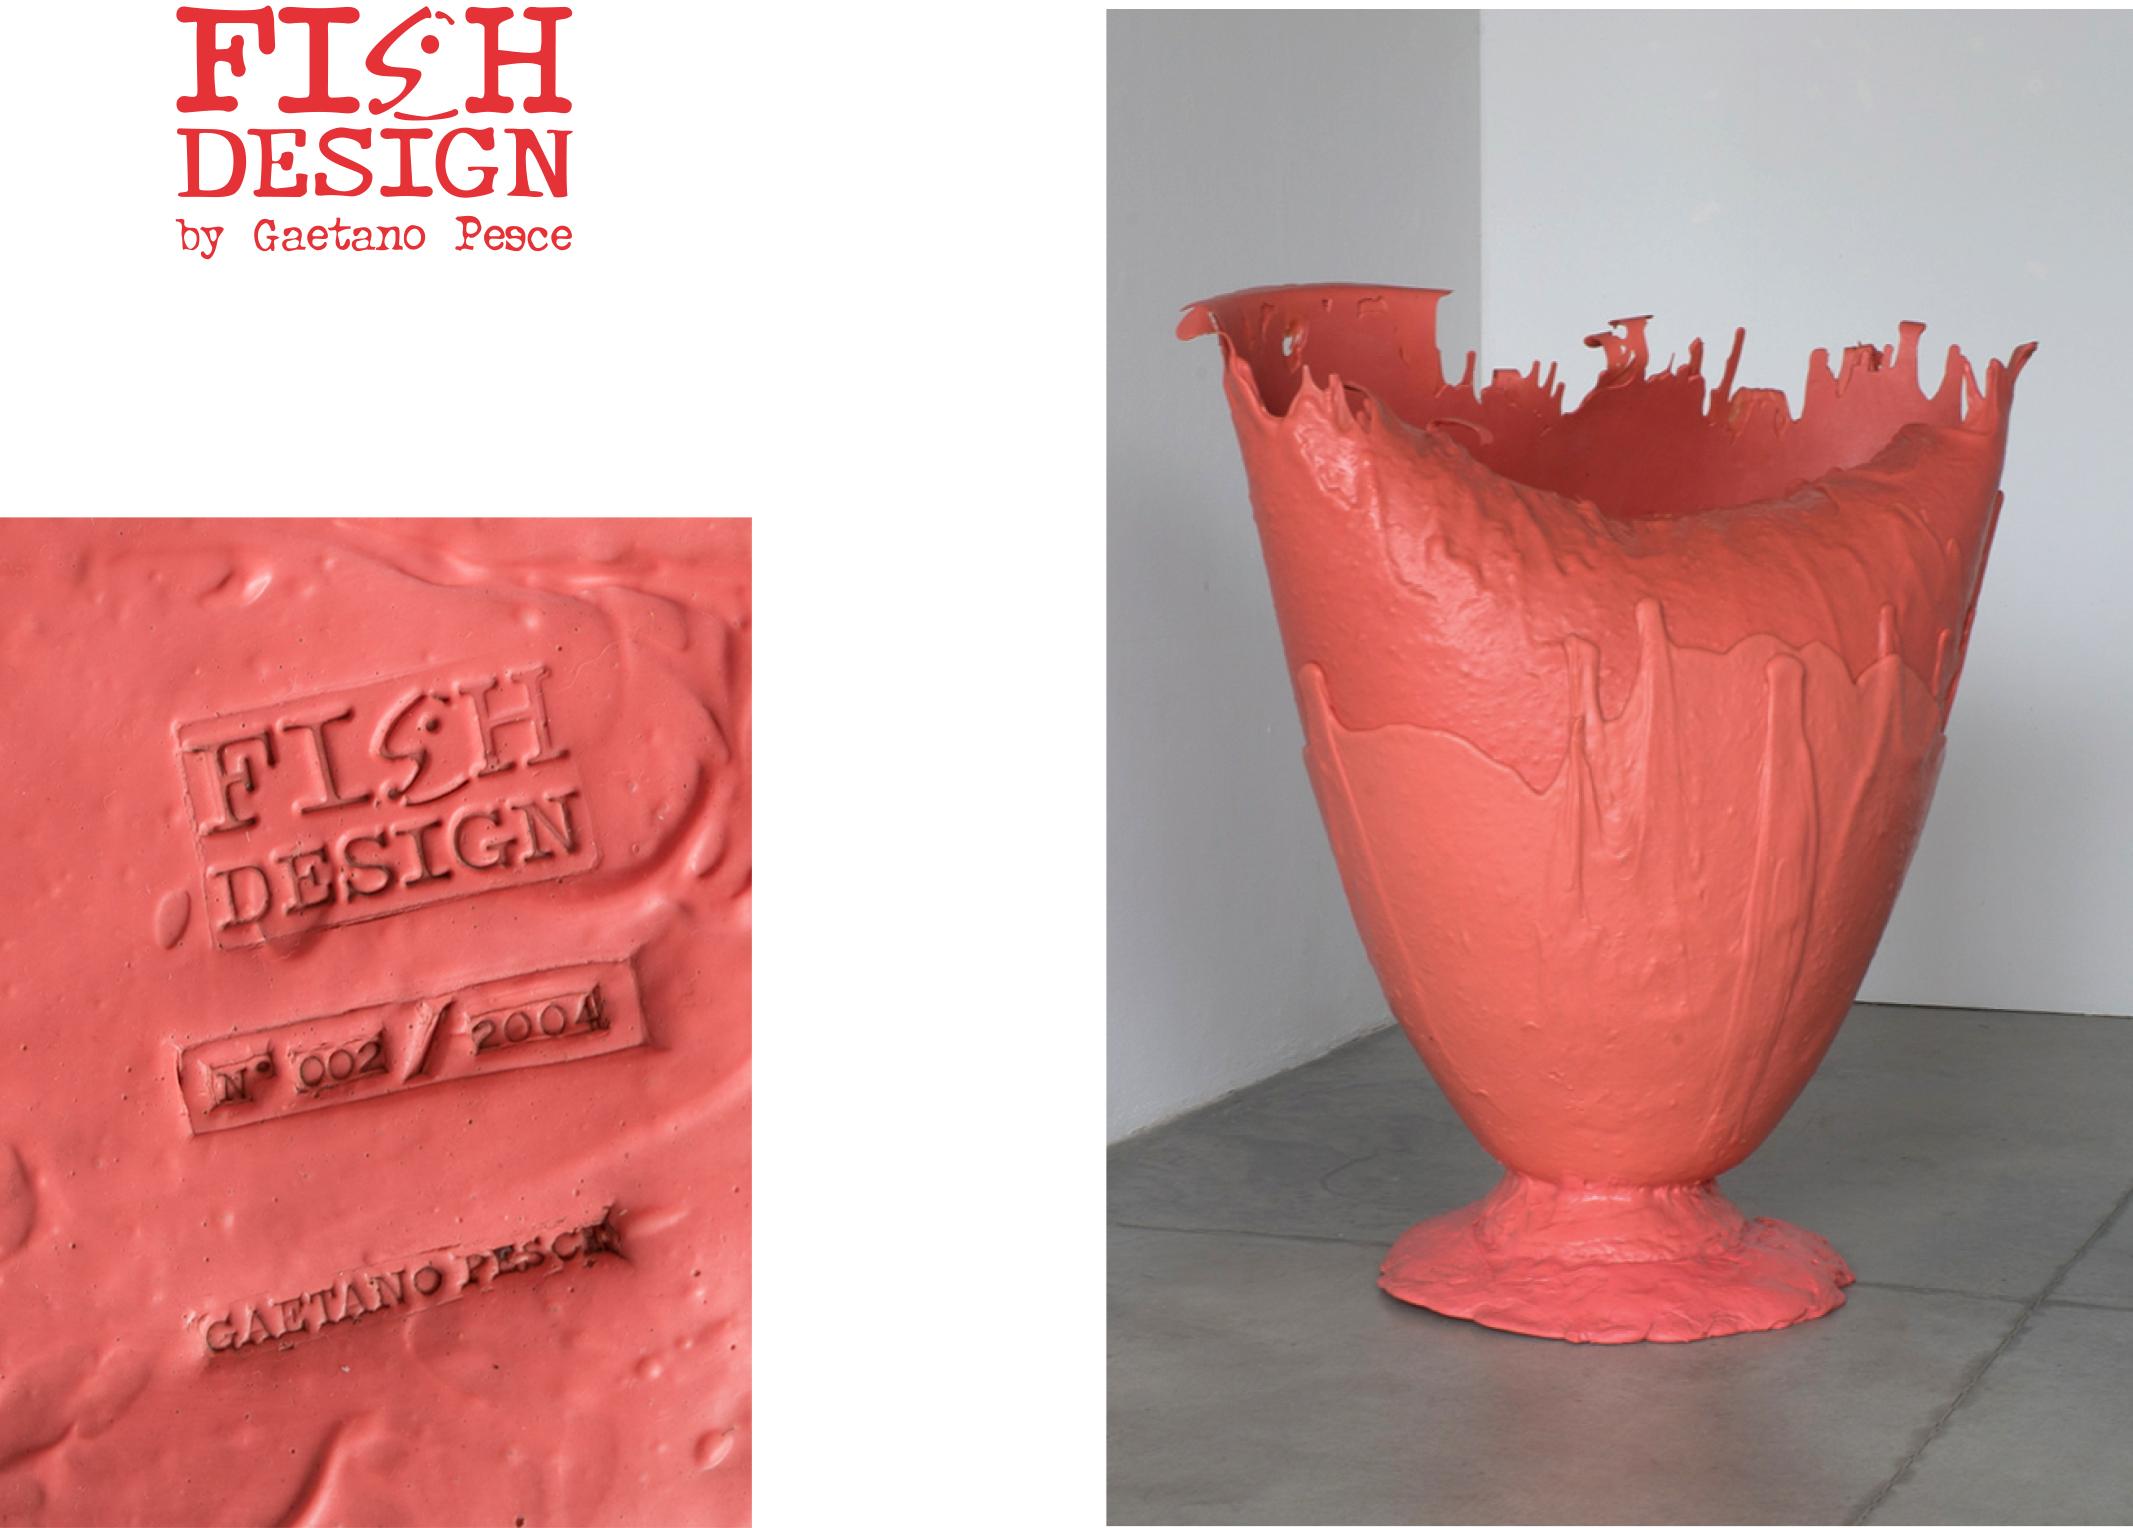 Model XXXL N. 002/2004 Vase by Gaetano Pesce, 2004, Salmon, Limited Edition In Good Condition For Sale In barasso, IT